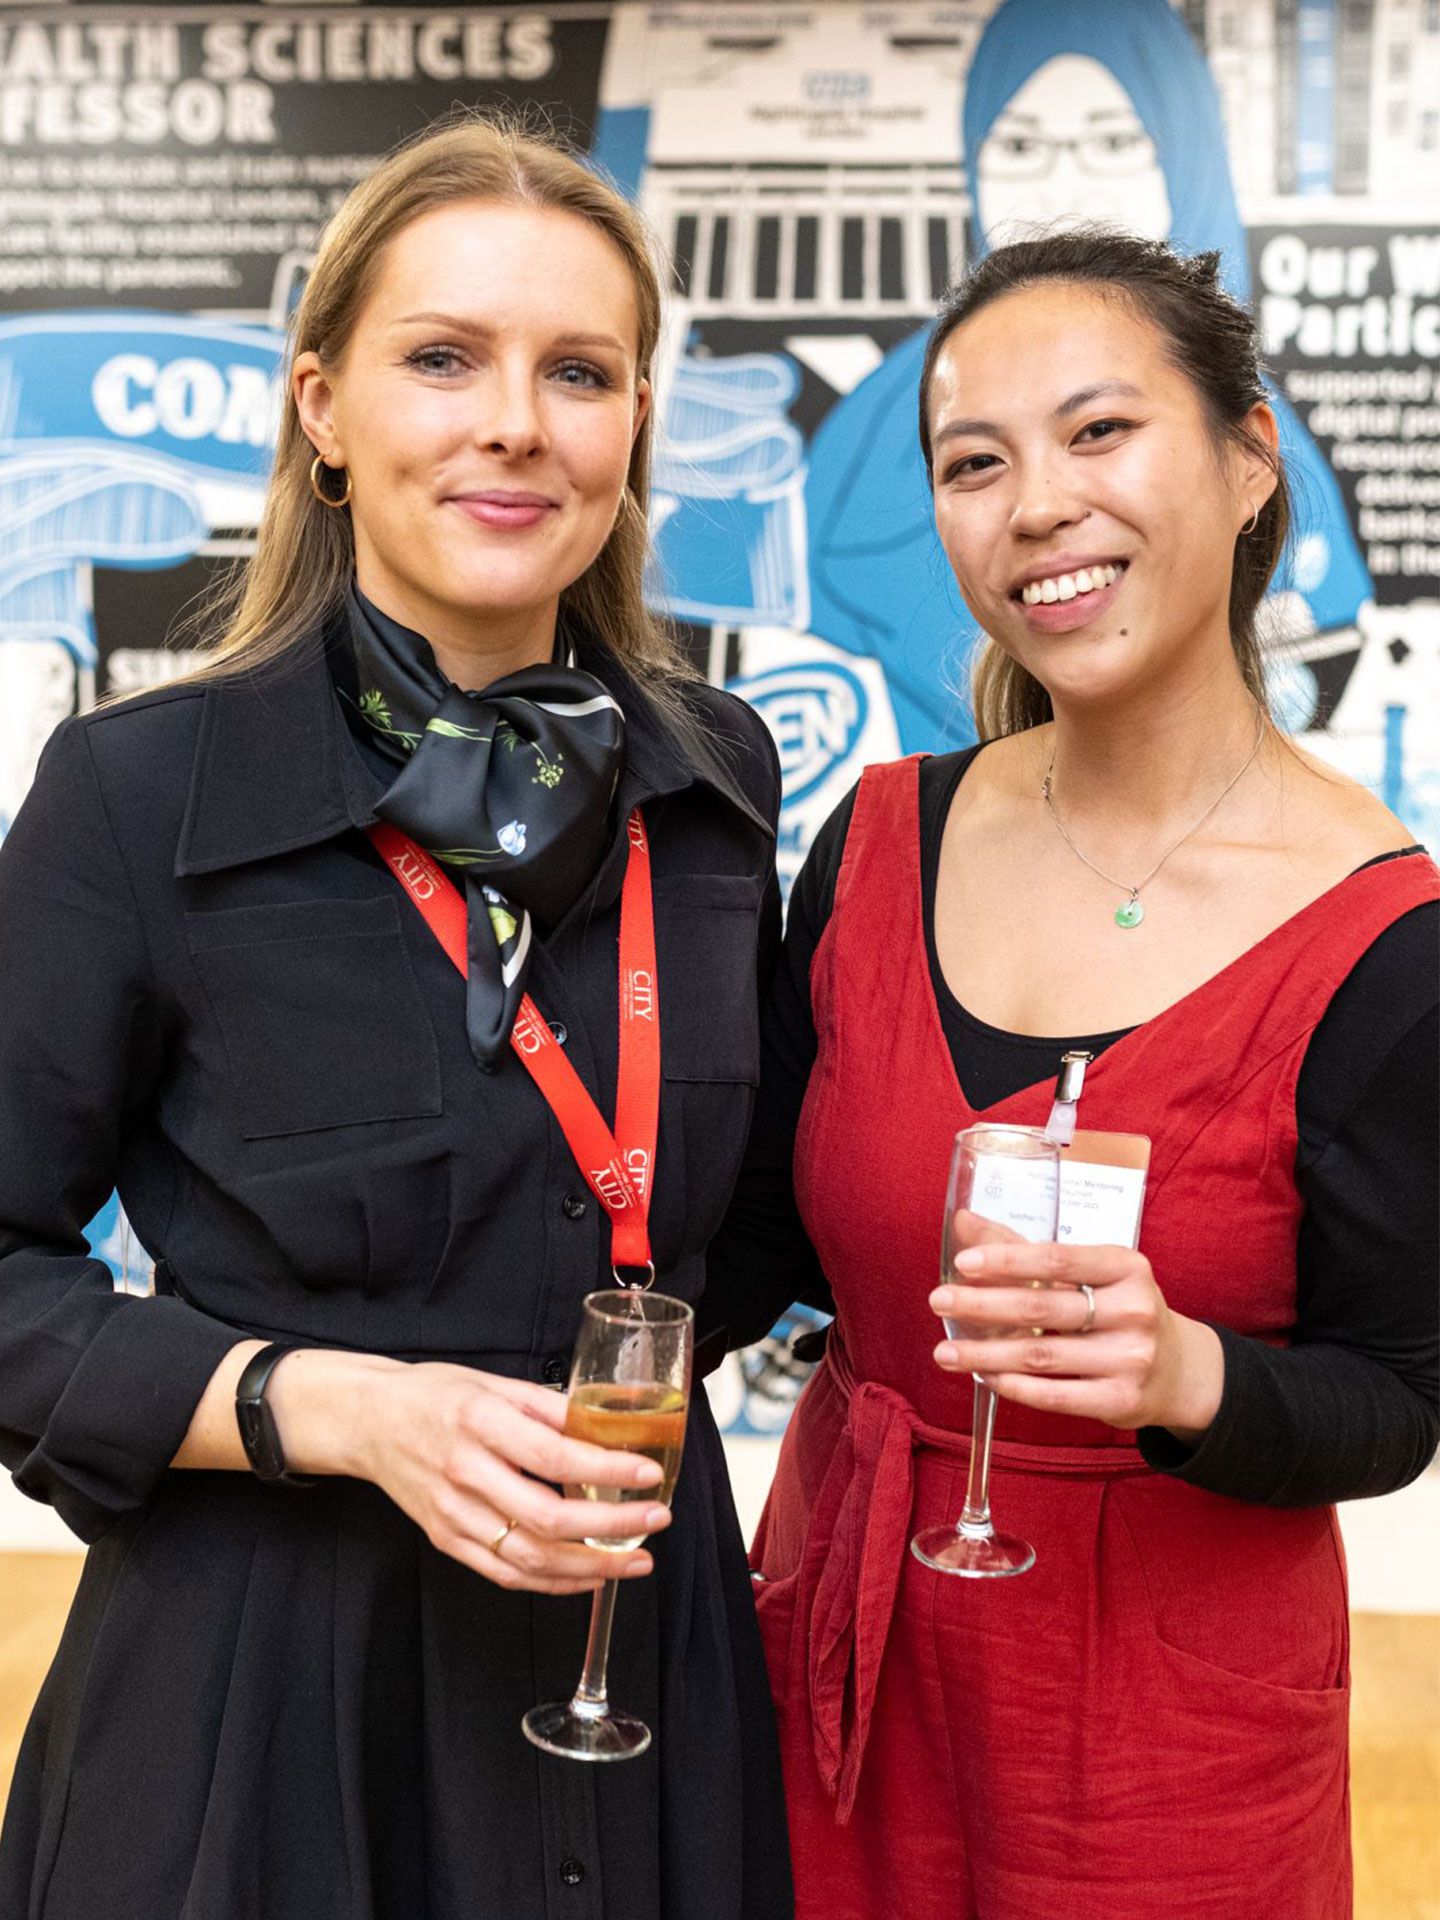 Picture Xenia Kotova (left) and Meghan Yang (right) at the City Professional Mentoring Scheme awards. They are holding a glass of fizz and are standing in front of a backdrop of a wall covered in cartoon drawings.